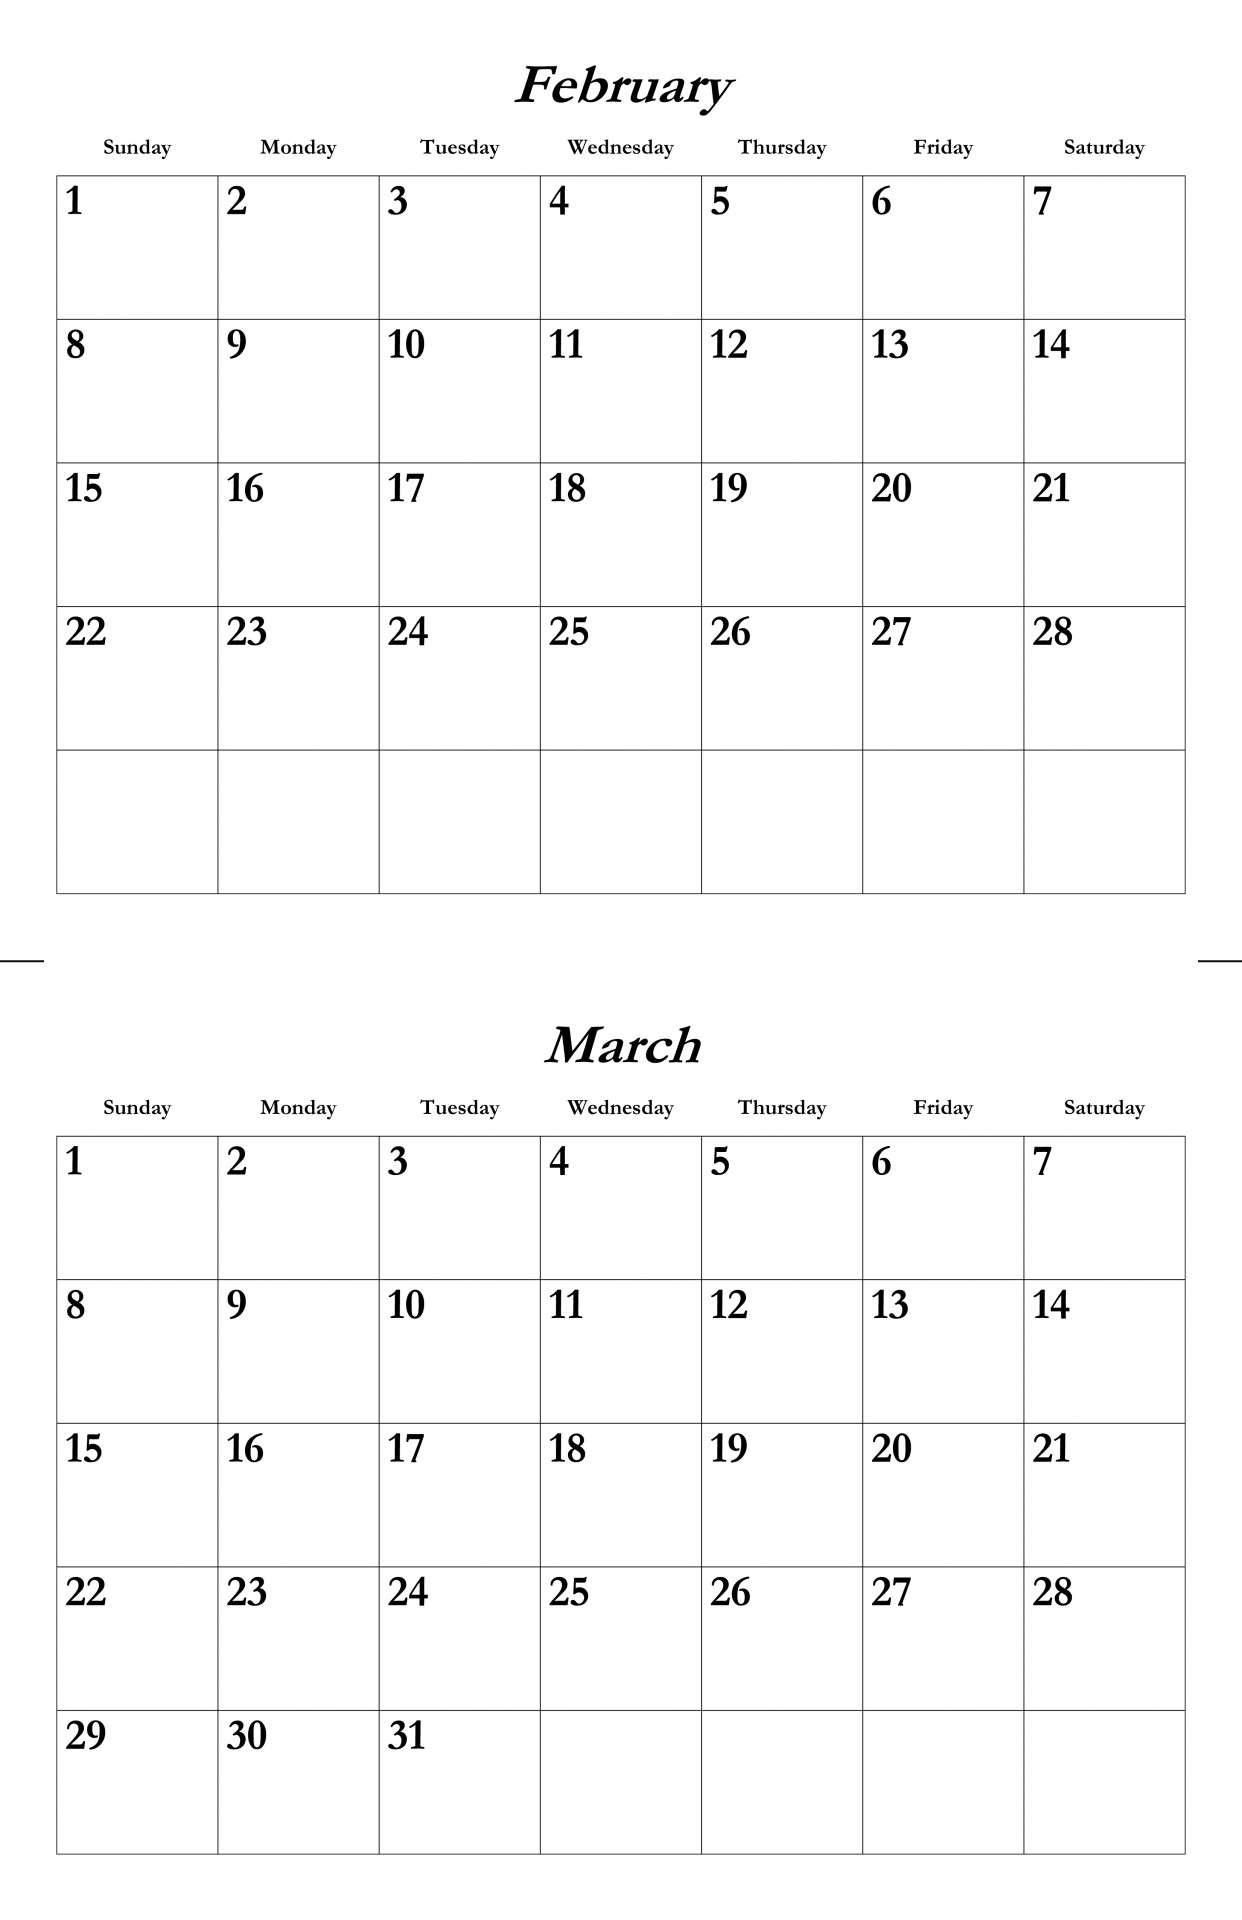 february march 2015 calendar planner free photo